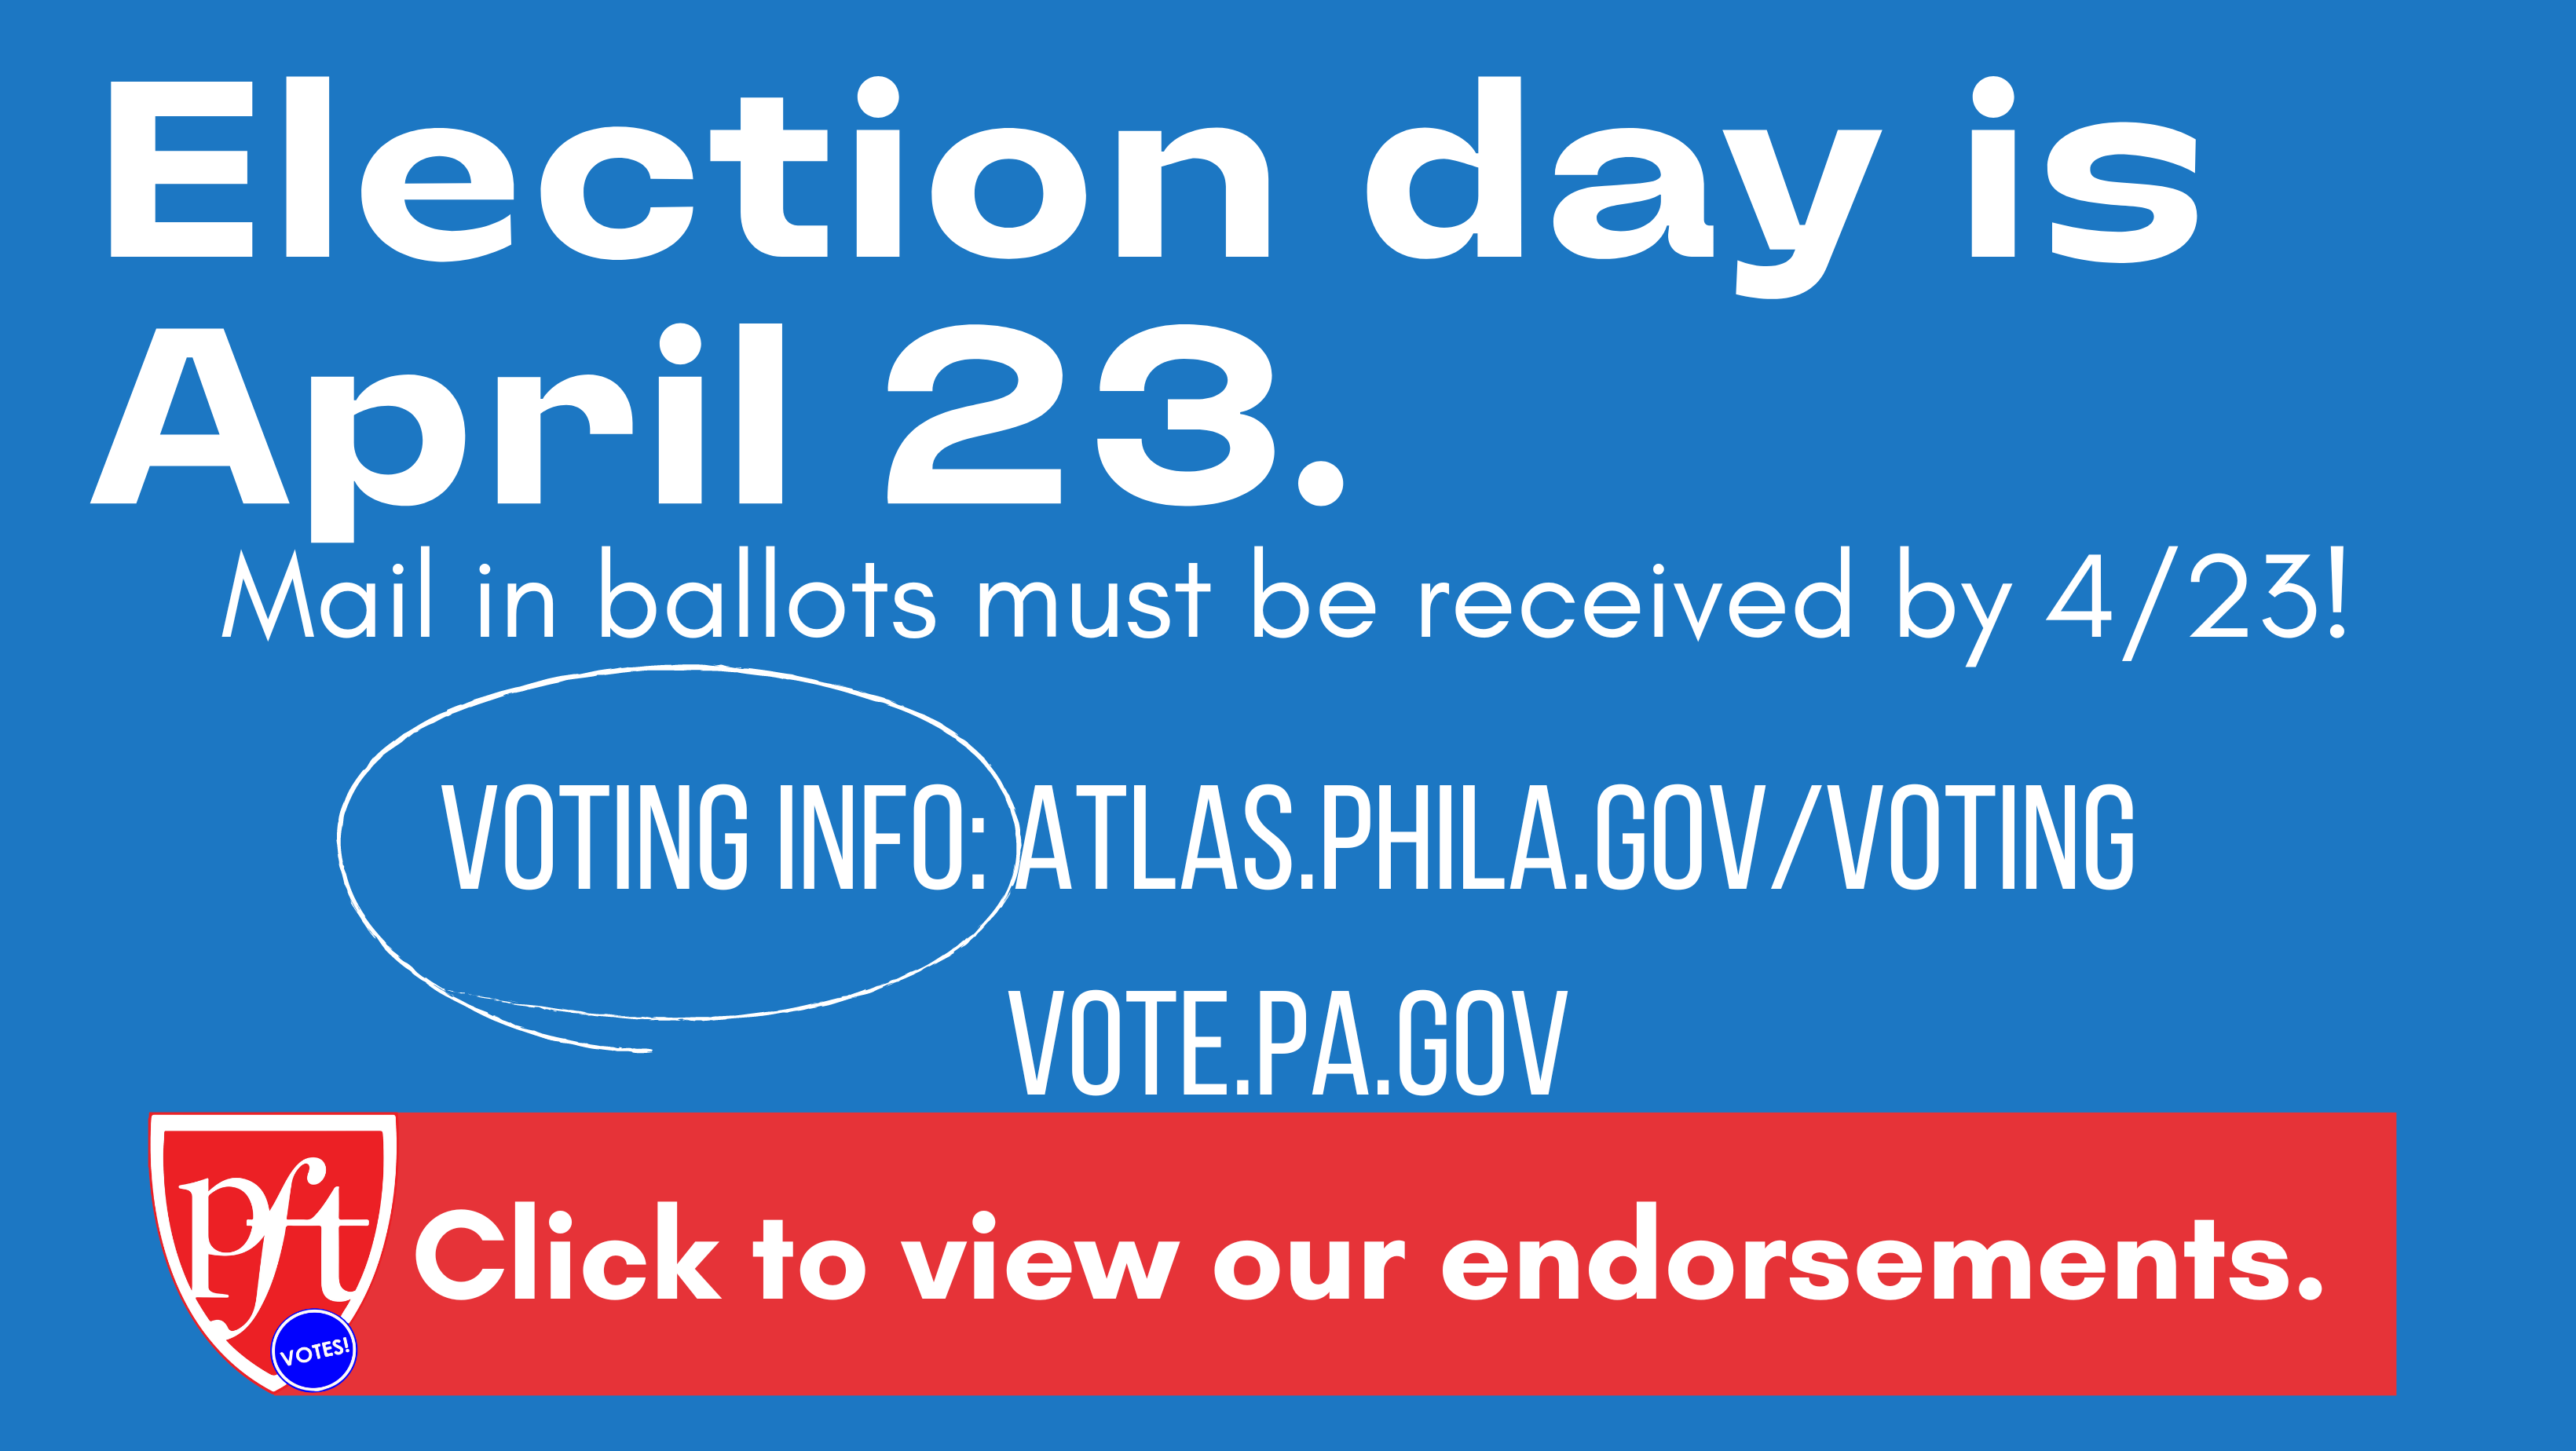 Election day is April 23. Click to view our endorsements.